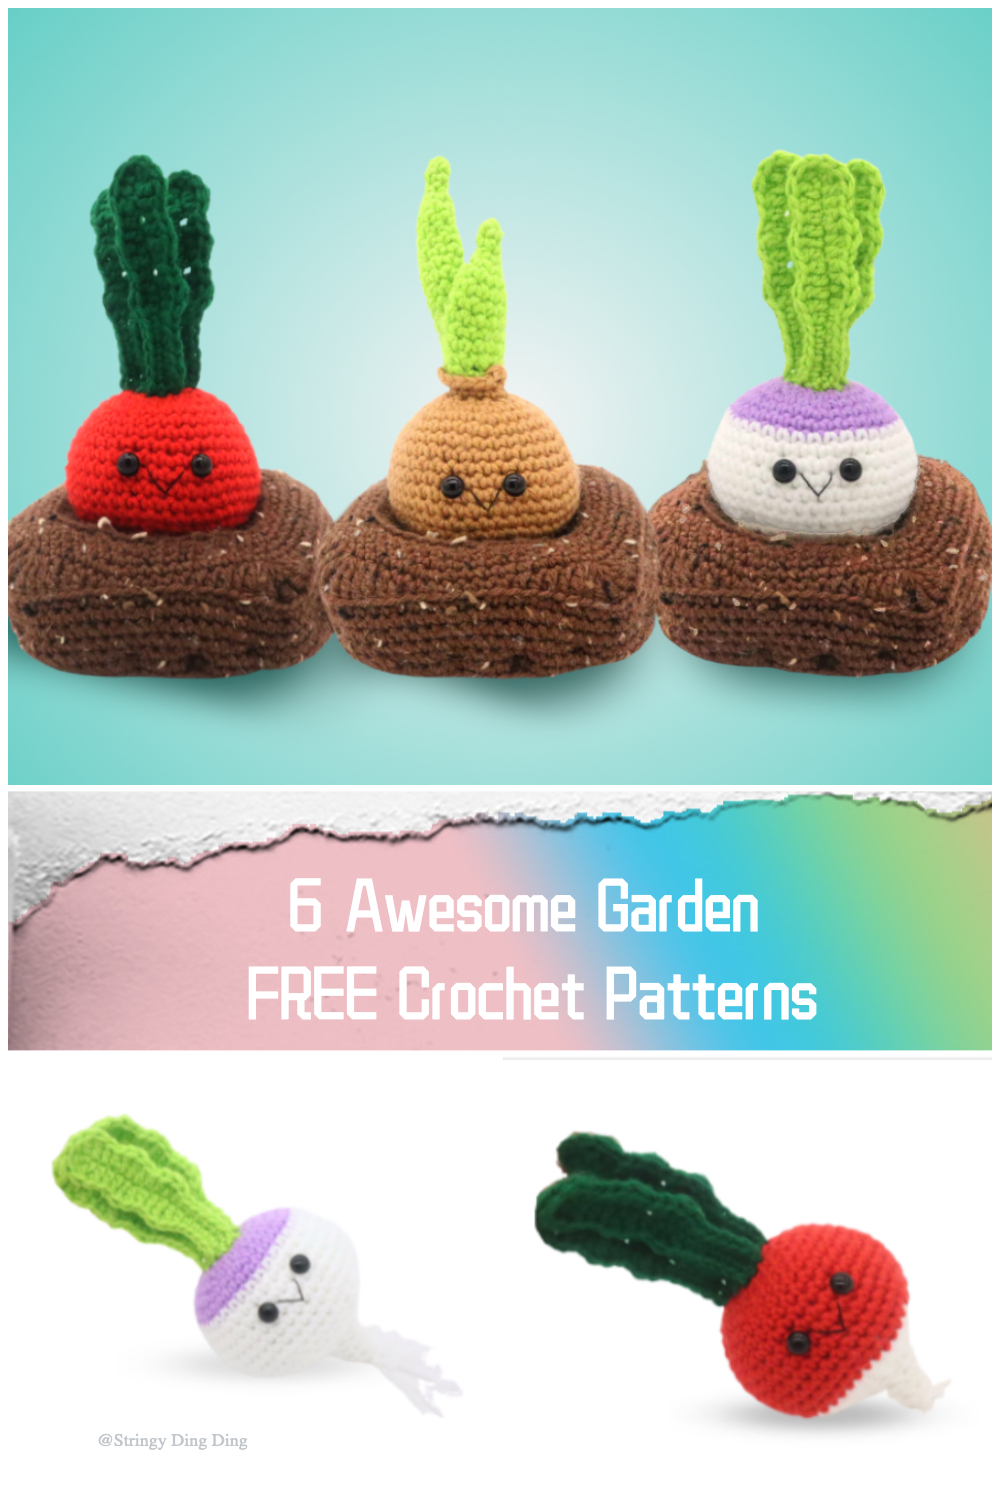 6 Awesome Garden FREE Crochet Patterns